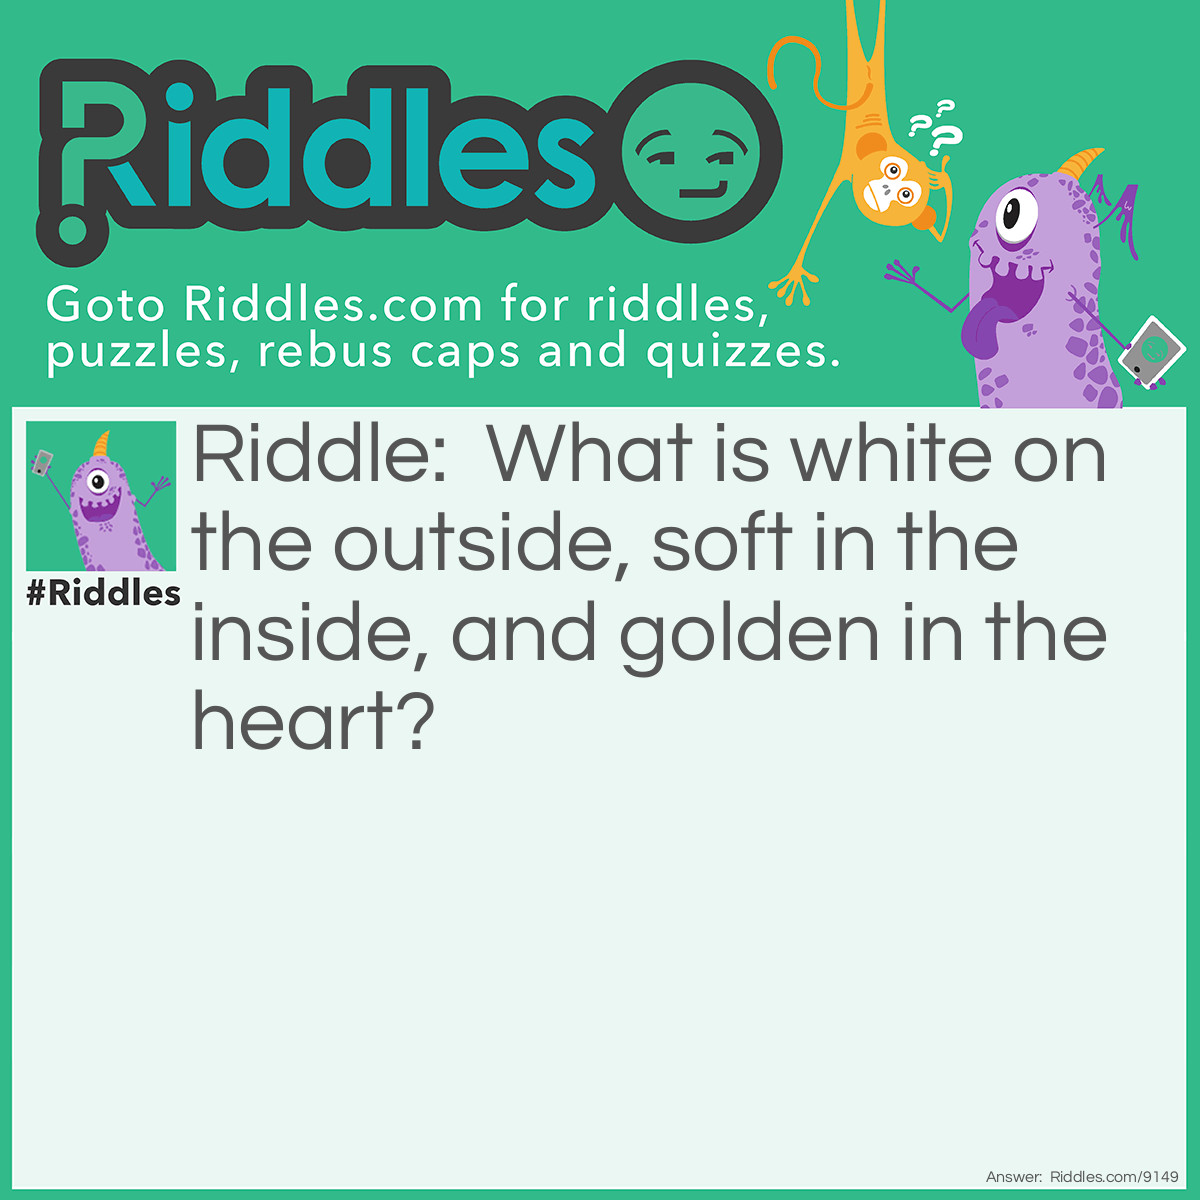 Riddle: What is white on the outside, soft in the inside, and golden in the heart? Answer: An egg.